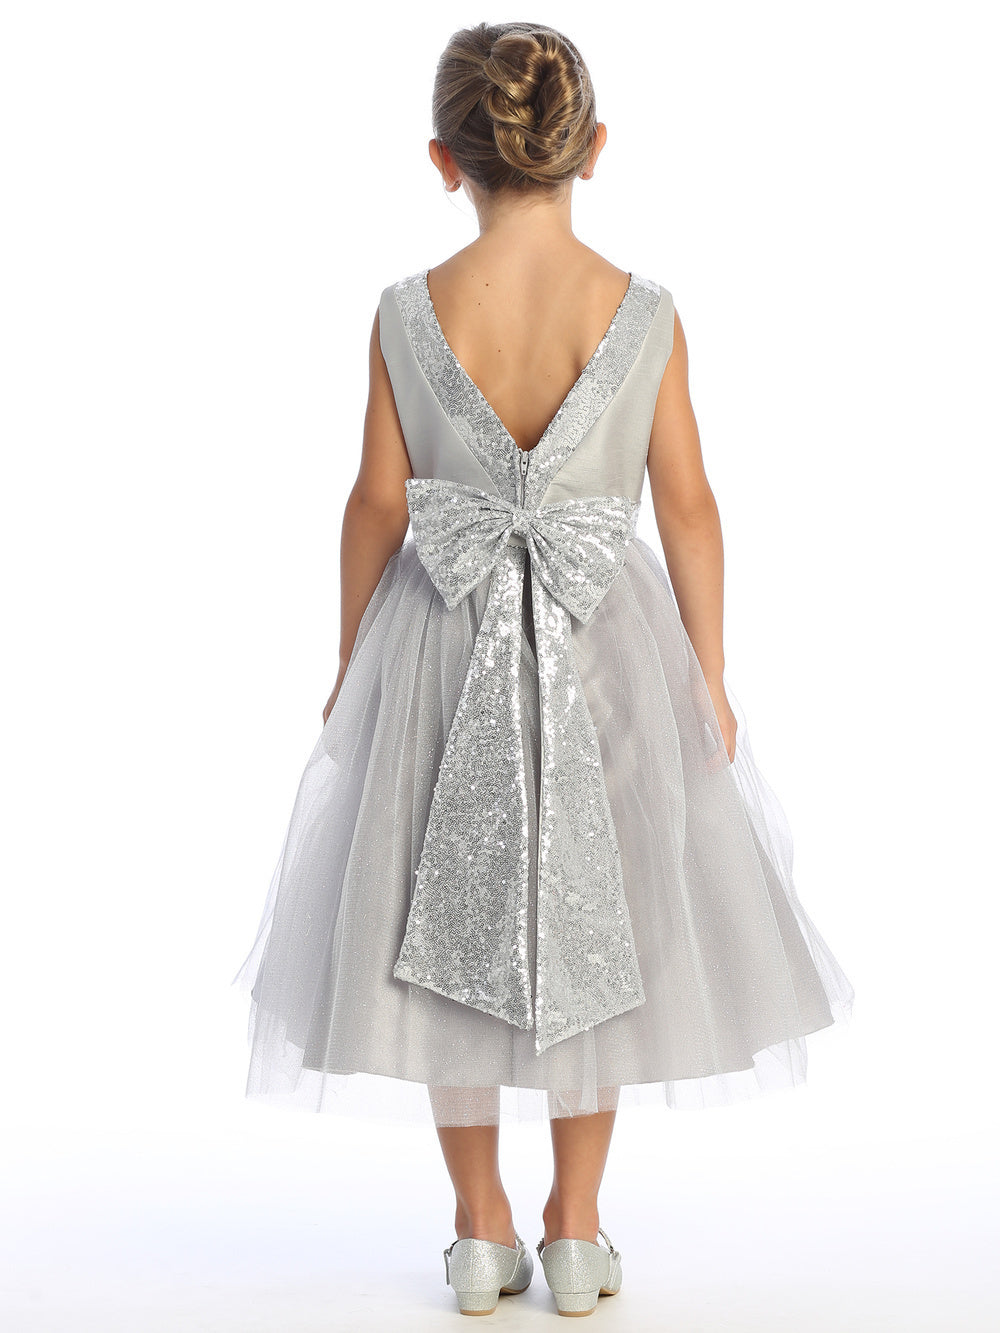 Sparkling sequins dance on silver shantung and tulle, enhancing a flower girl's grace.